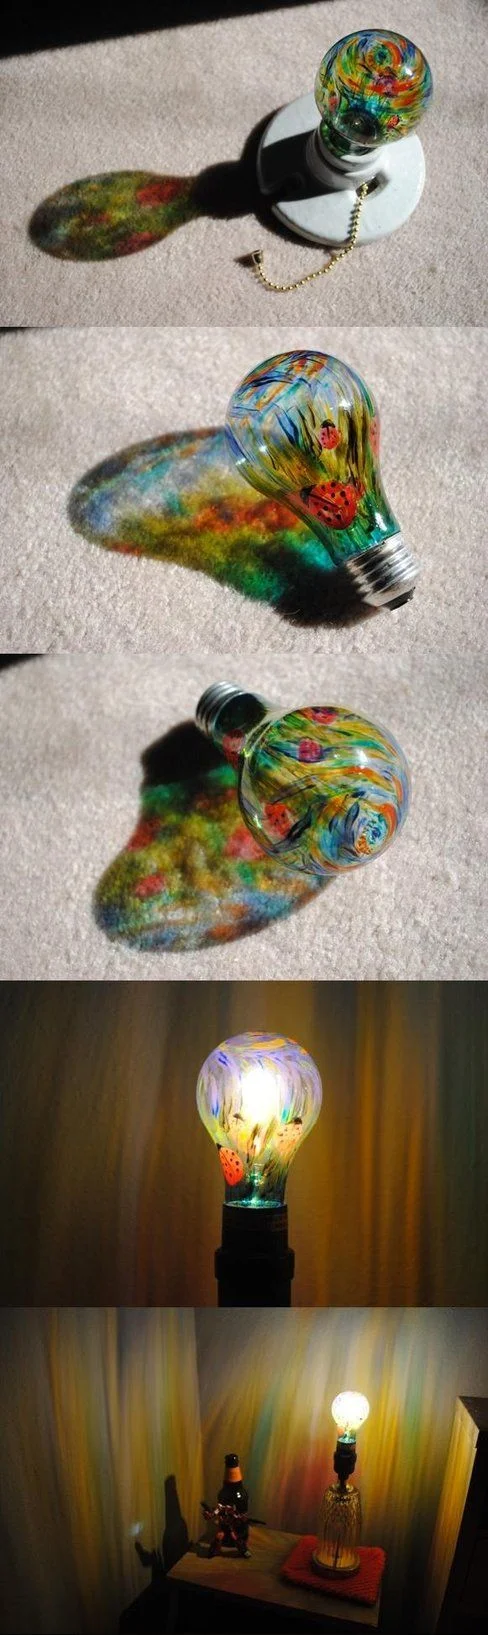 37.PAINT A LIGHT BULB AND SPREAD THE COLORS